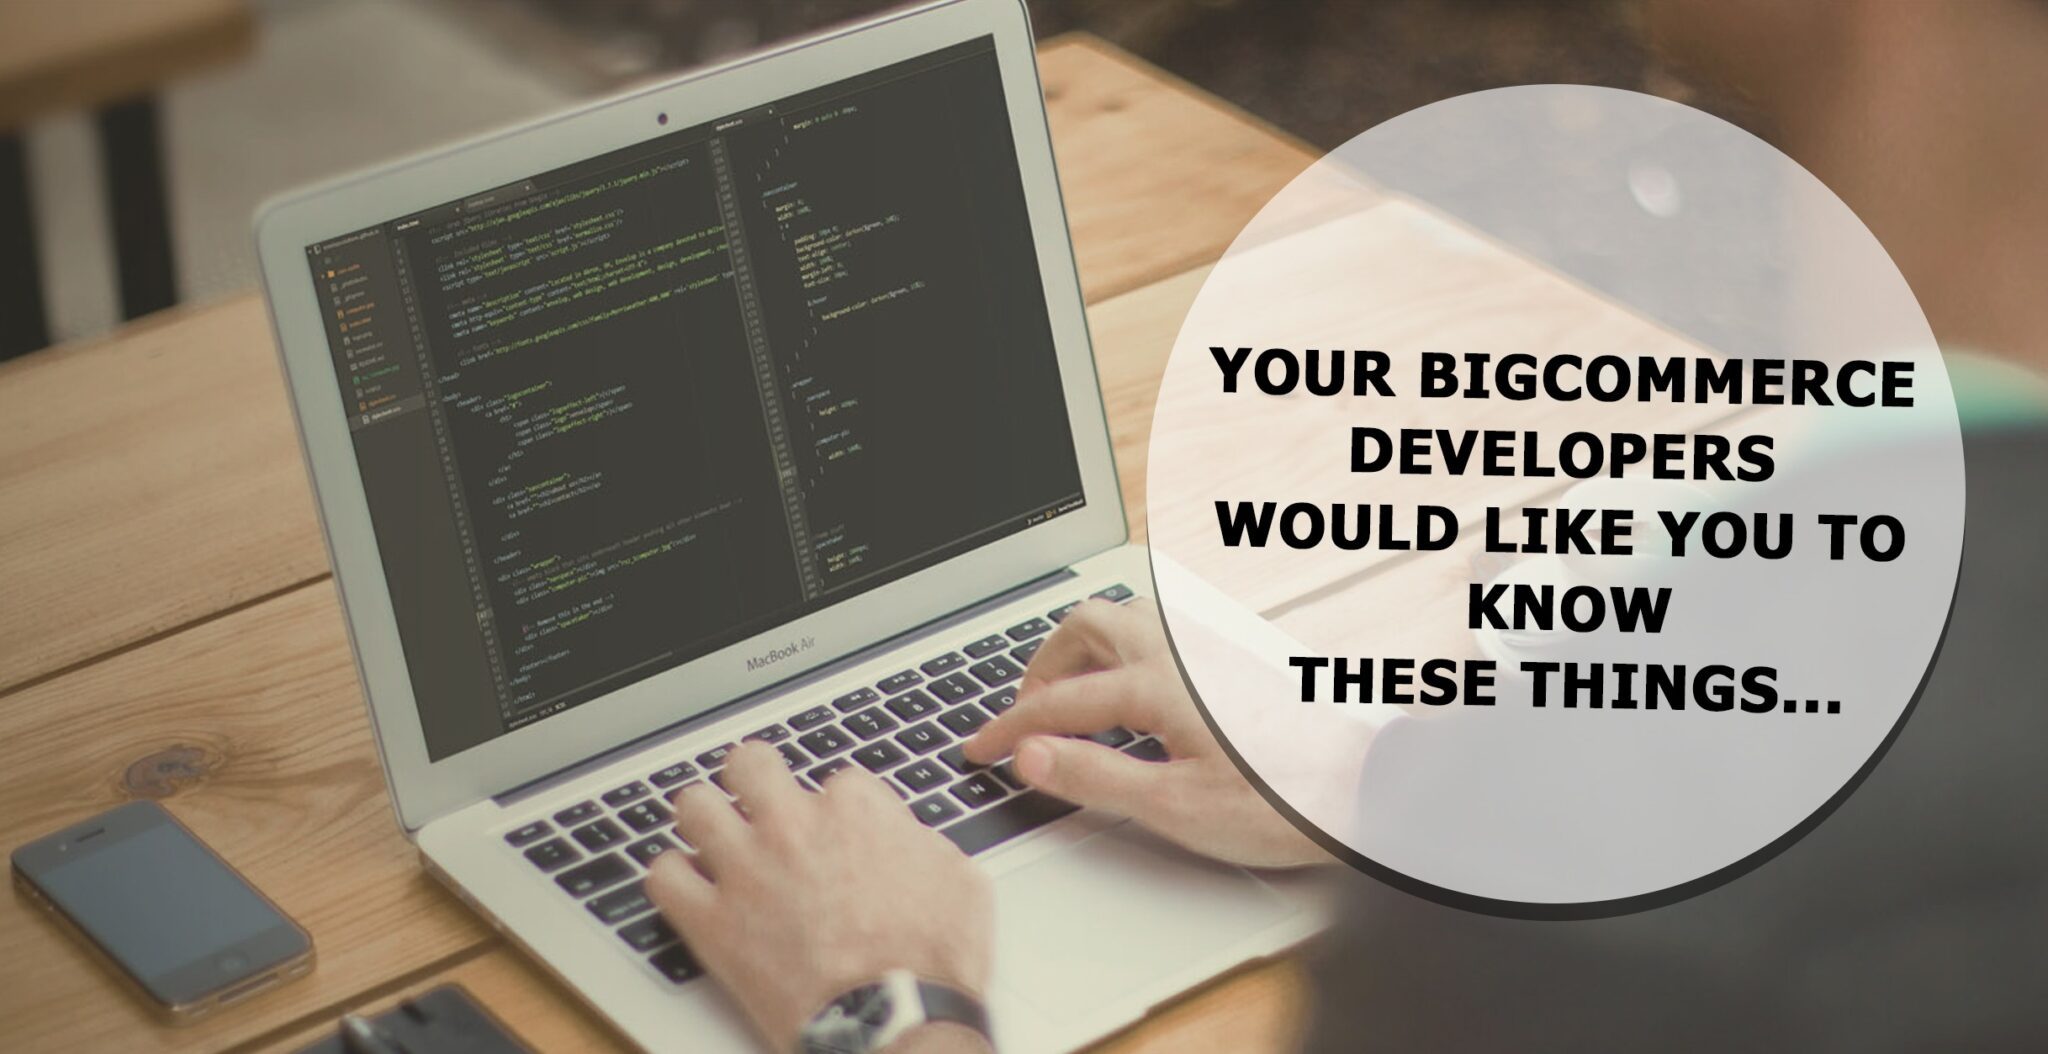 Your BigCommerce Developers Would Like You to Know These Things